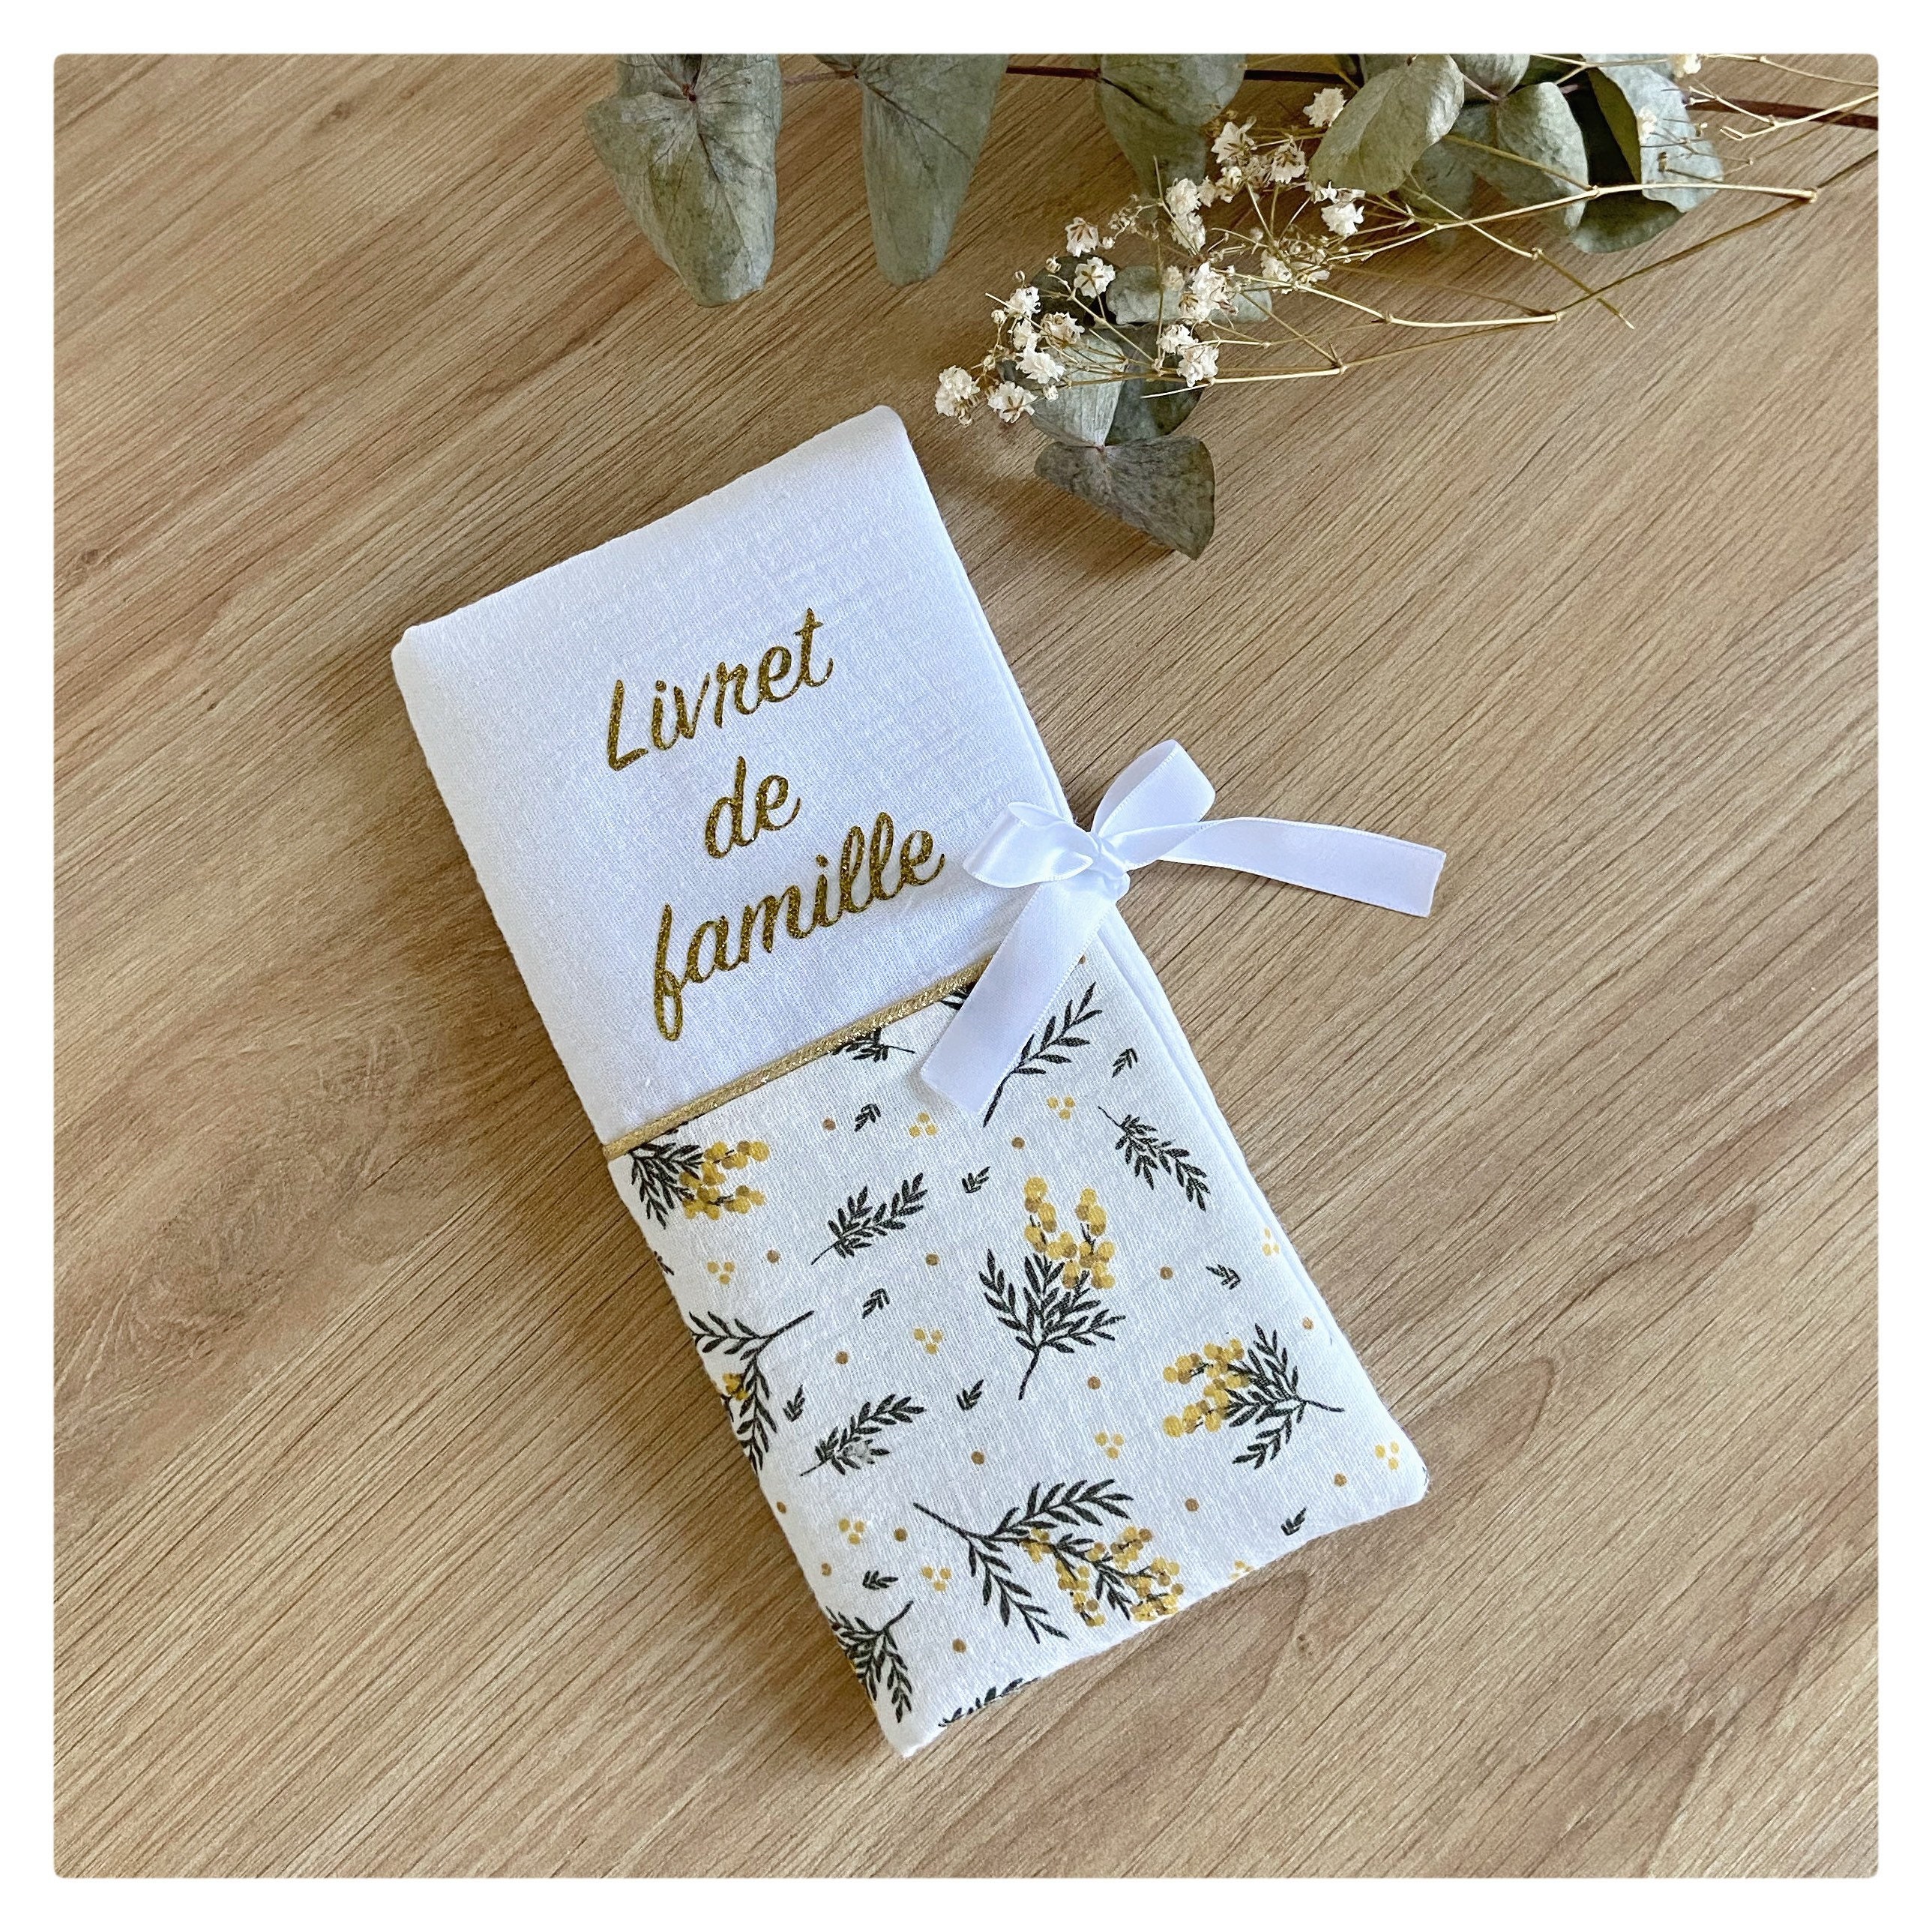 Protects Family Booklet, Double Mimosa Cotton Gauze, Ideal